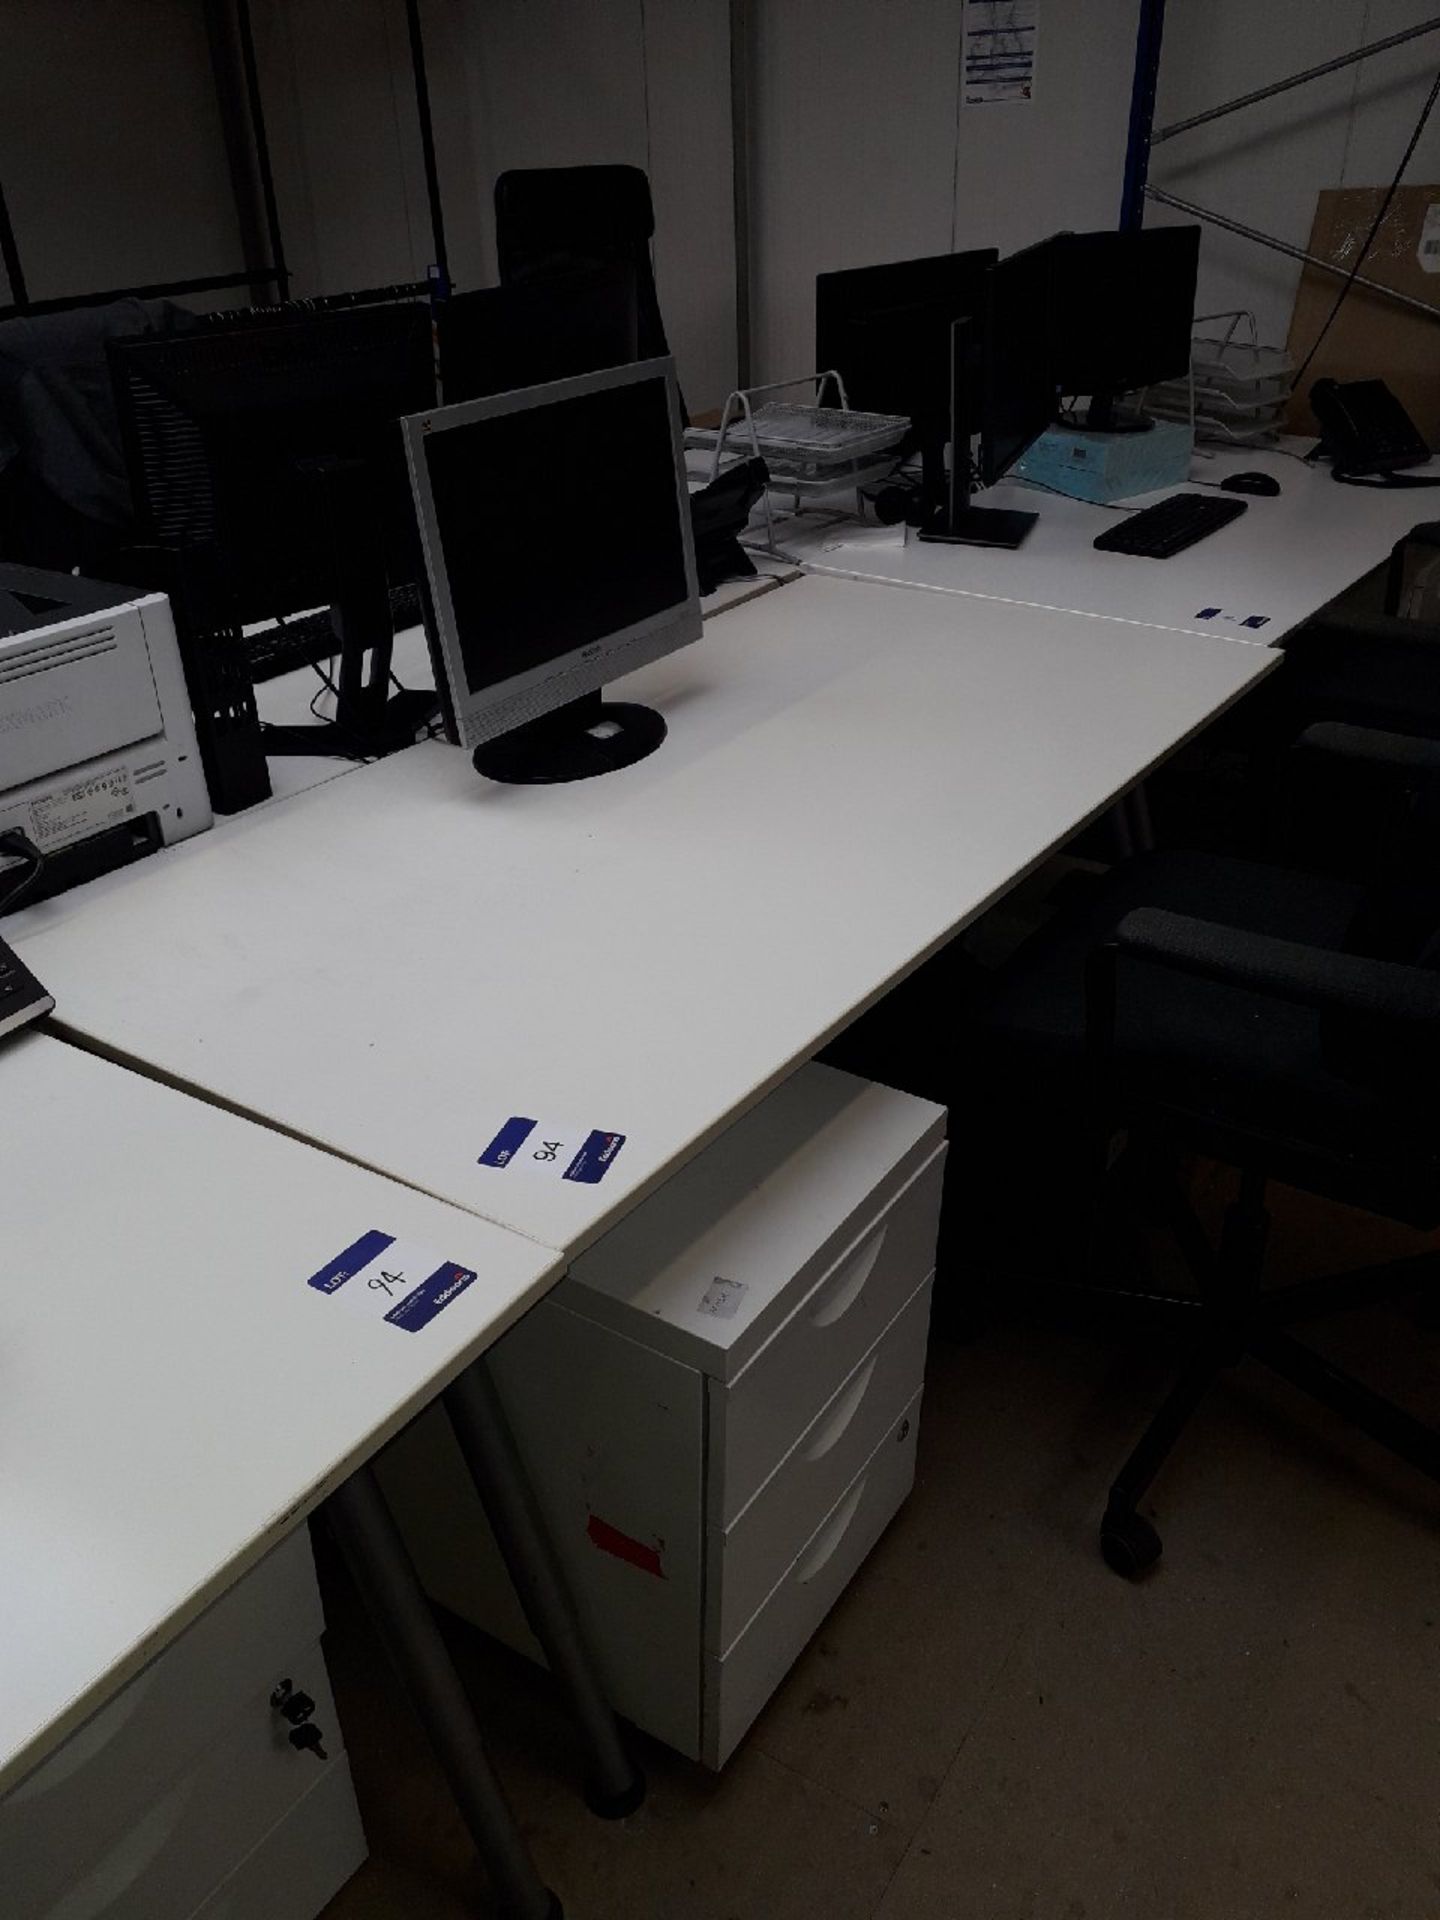 6 desks 1600 x 800 to include pedestals, chairs and desk furniture (excludes PC's and telephones)